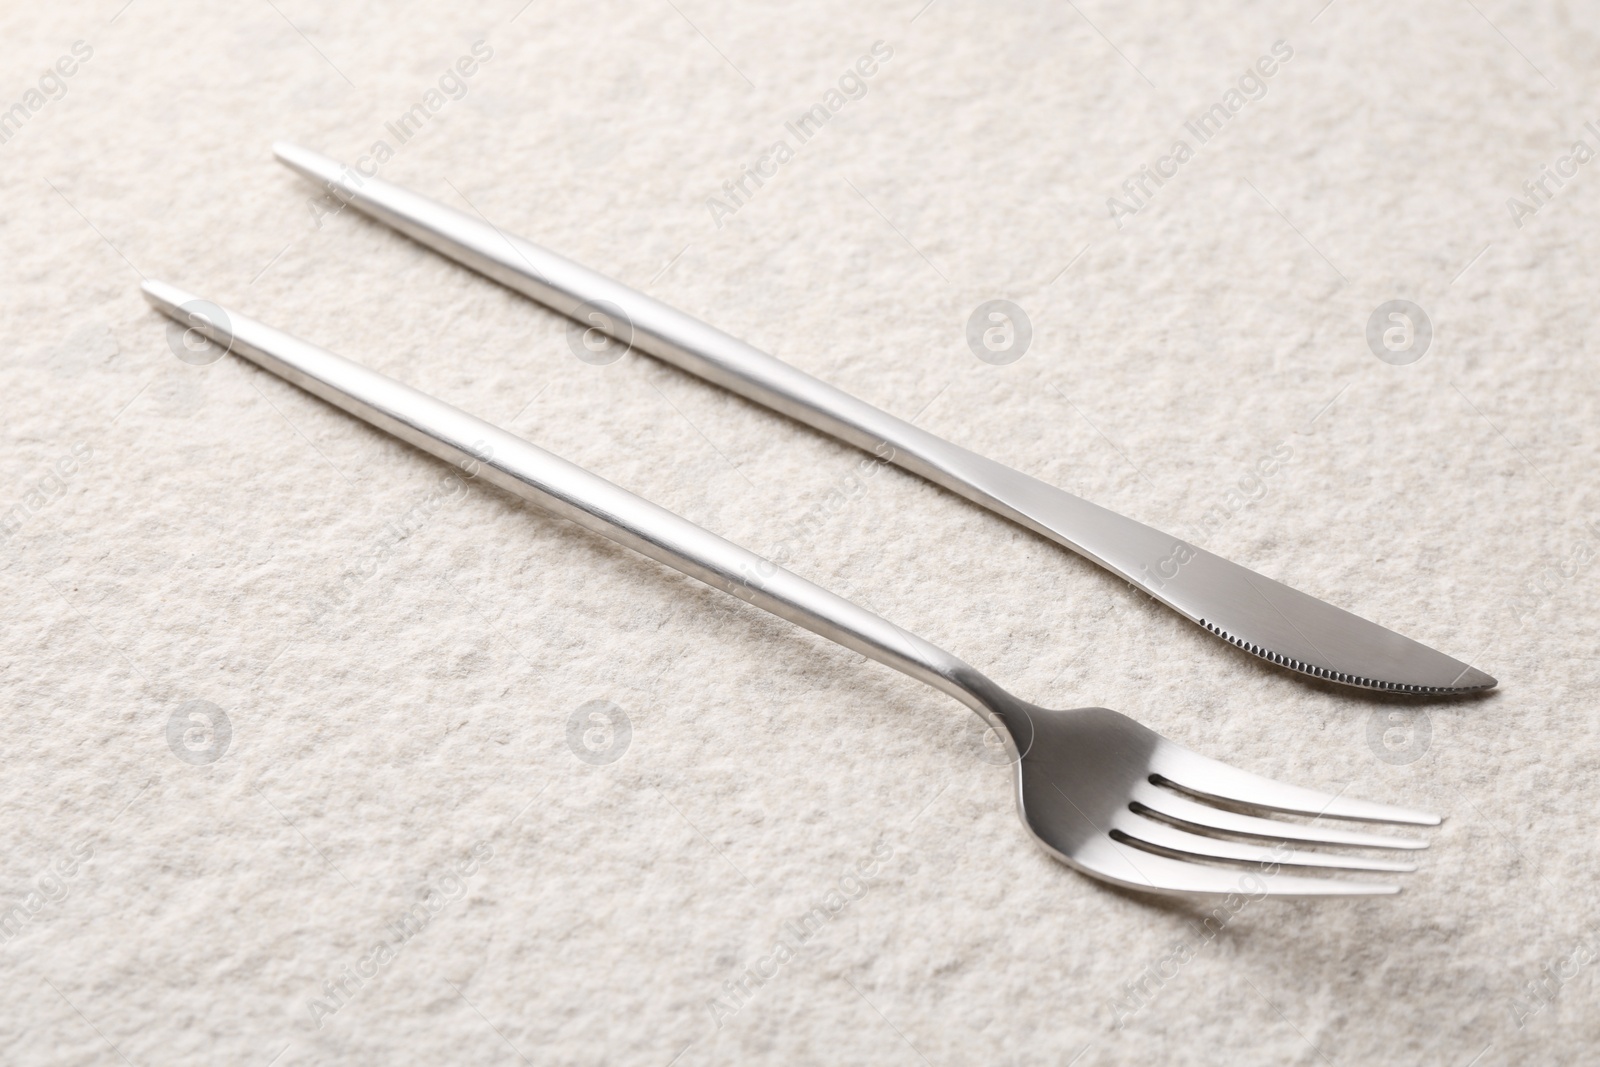 Photo of Stylish cutlery. Silver knife and fork on light textured table